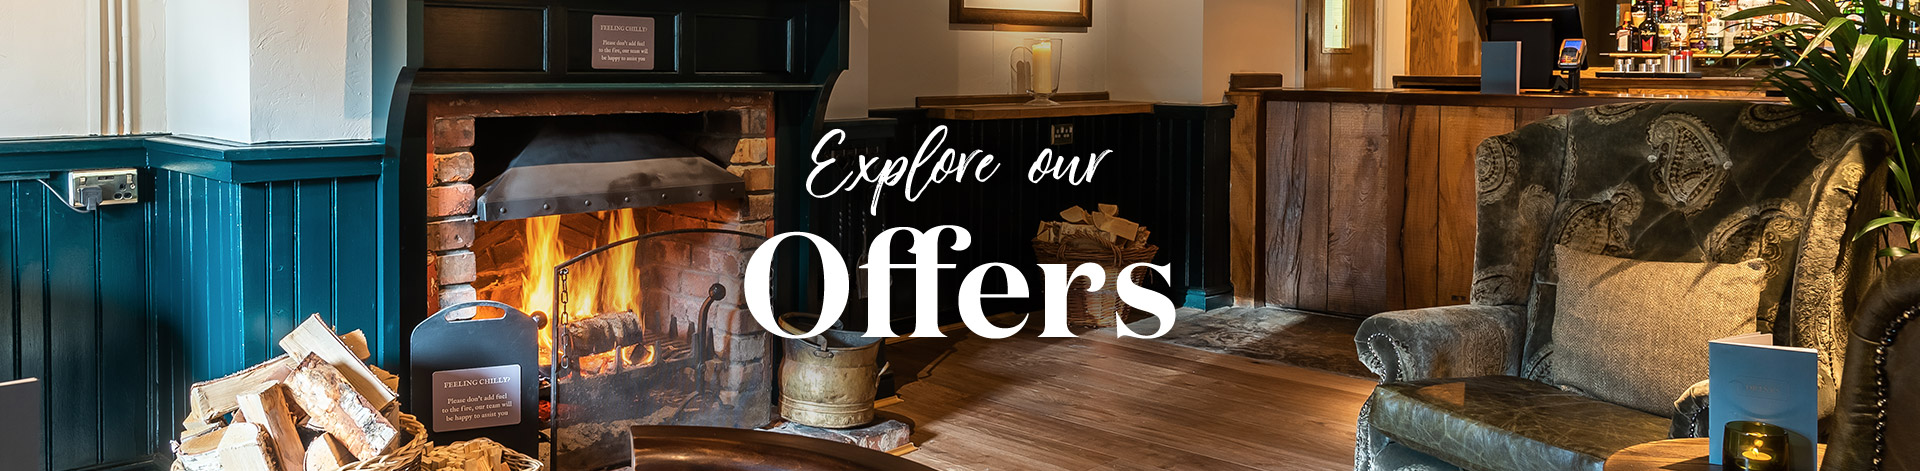 Our latest offers at The Hillside Inn